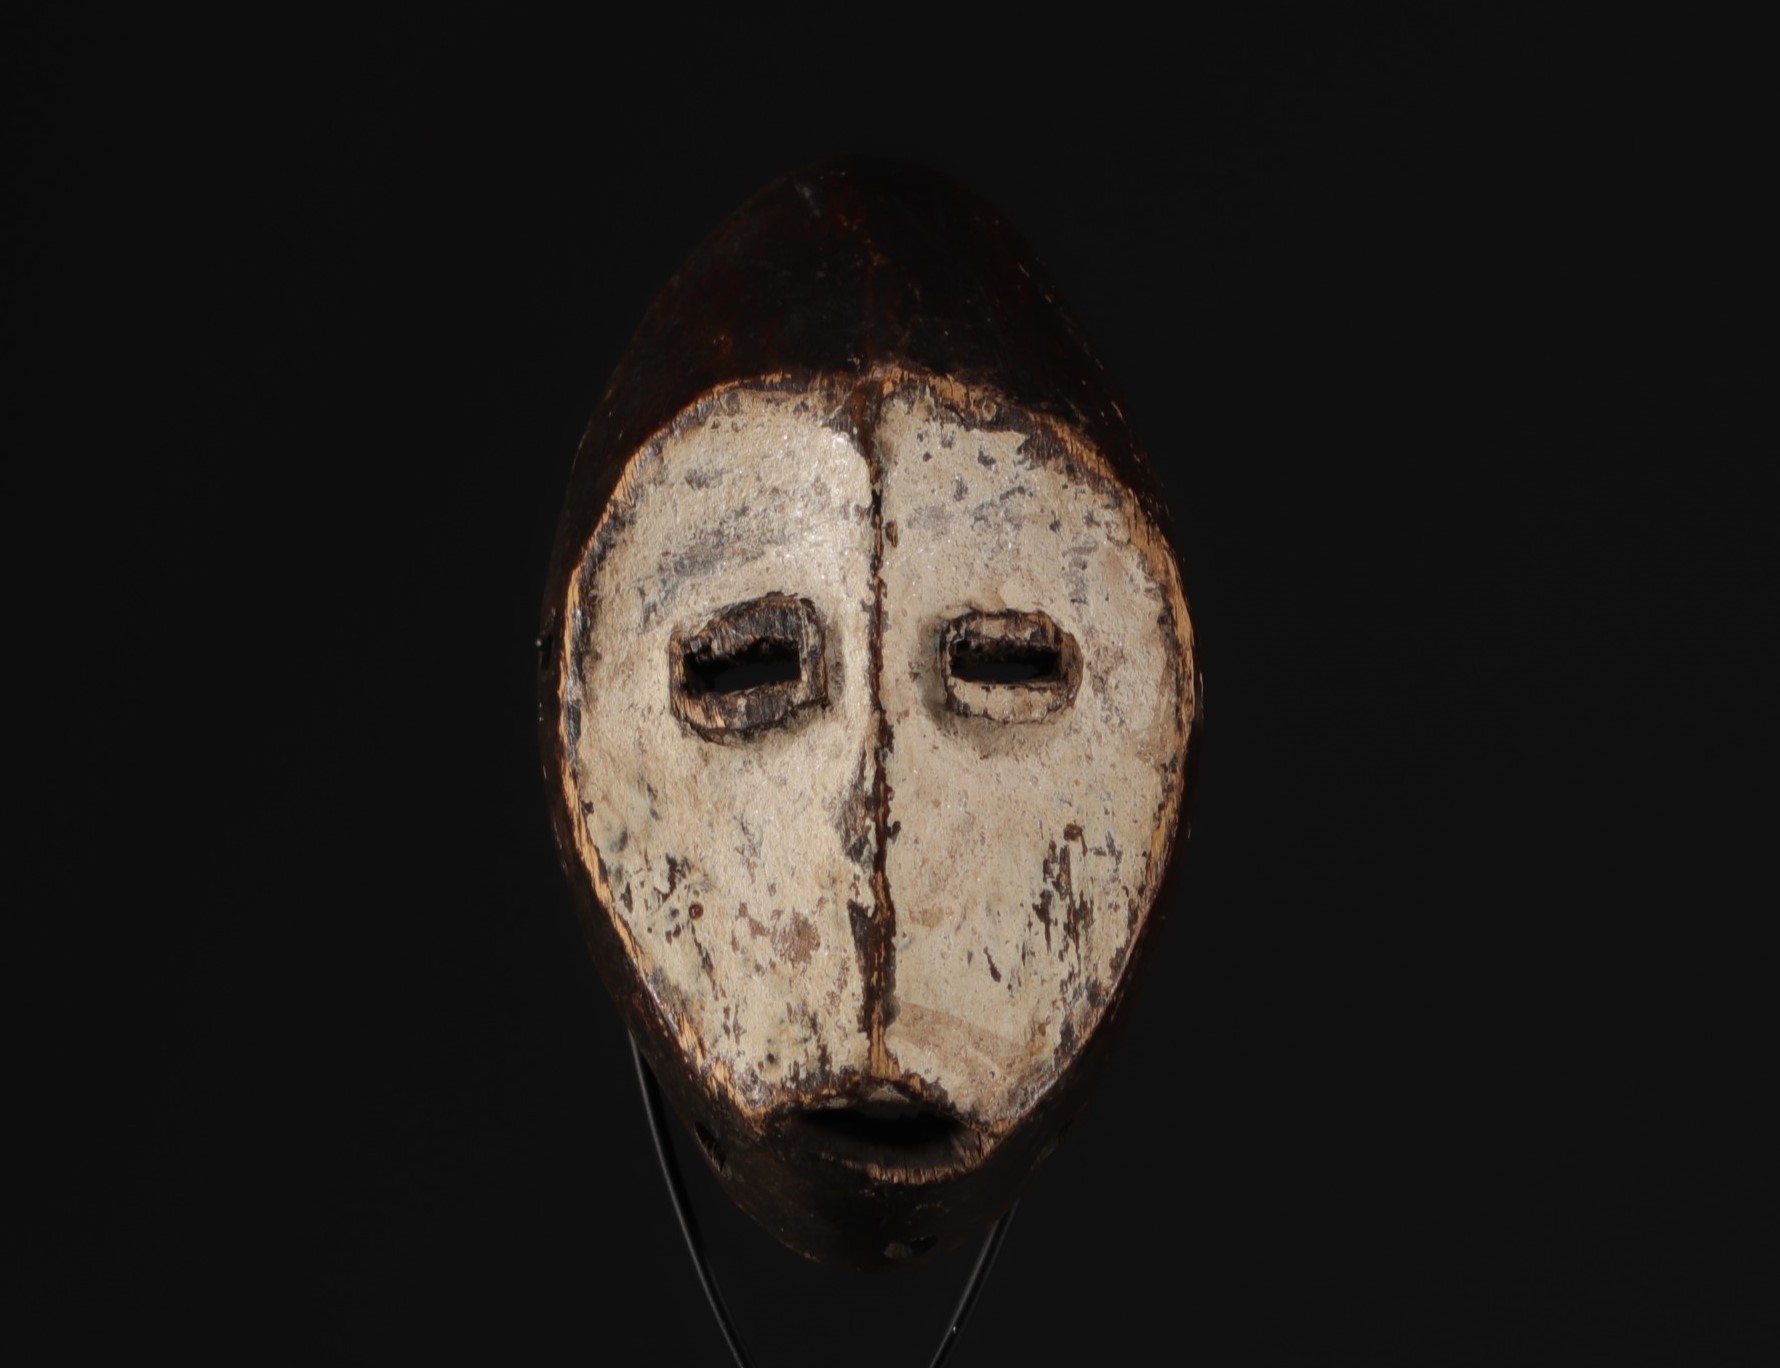 DRC - Lega mask in sculpted wood and pigments - Michel Boulanger Collection Liege - Image 4 of 4